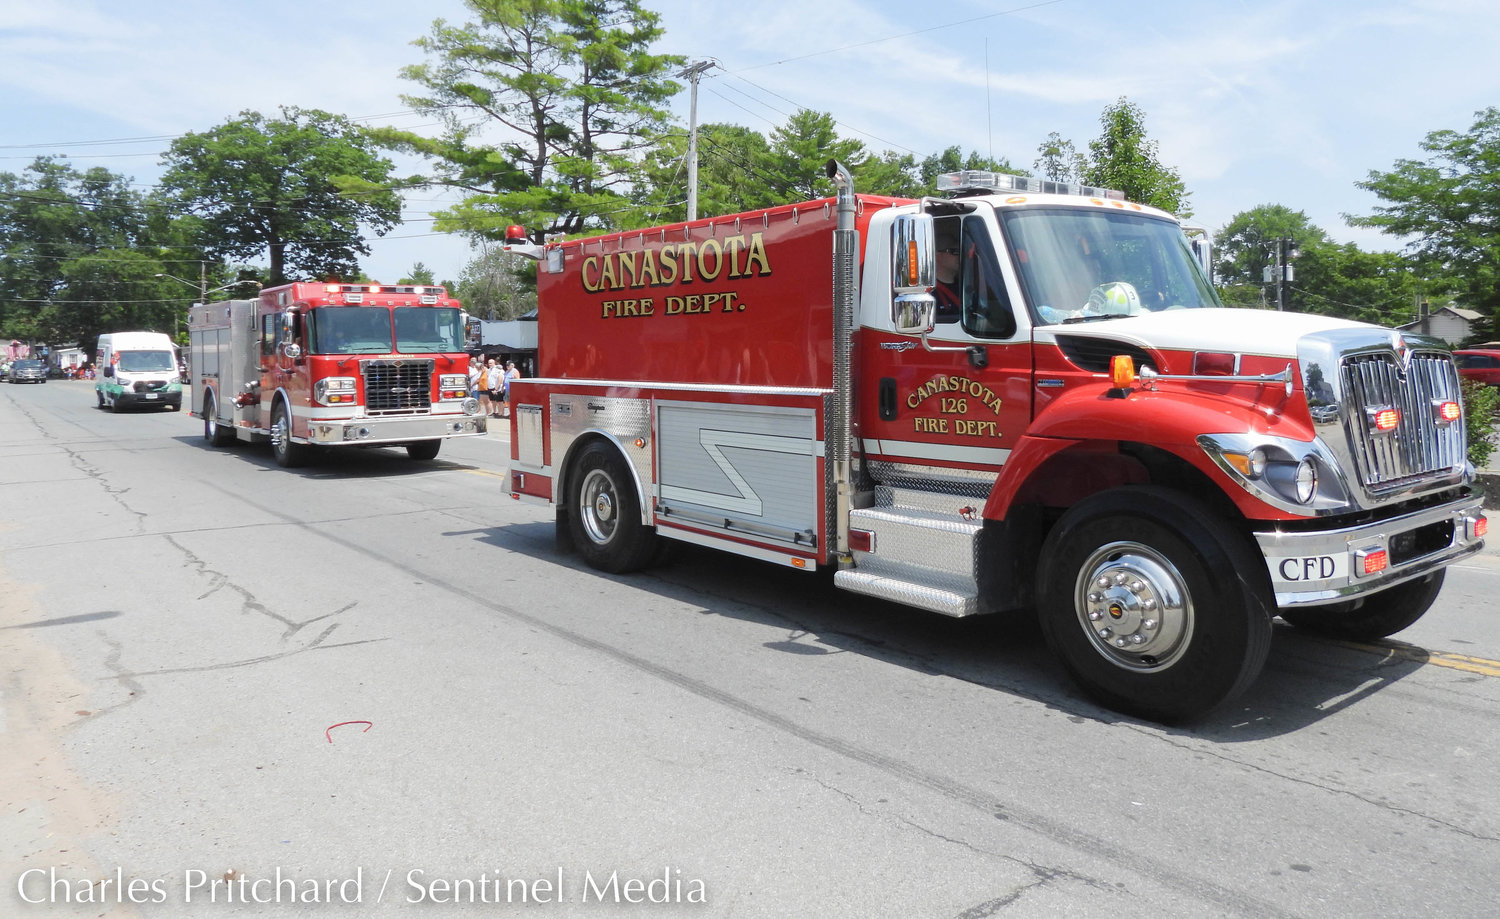 The Sylvan Beach Pirate's Parade makes its way down Main Street. Pictured is the Canastota Fire Department, broadcasting the Wellerman Sea Shanty from their fire engine to the delight of attendees.